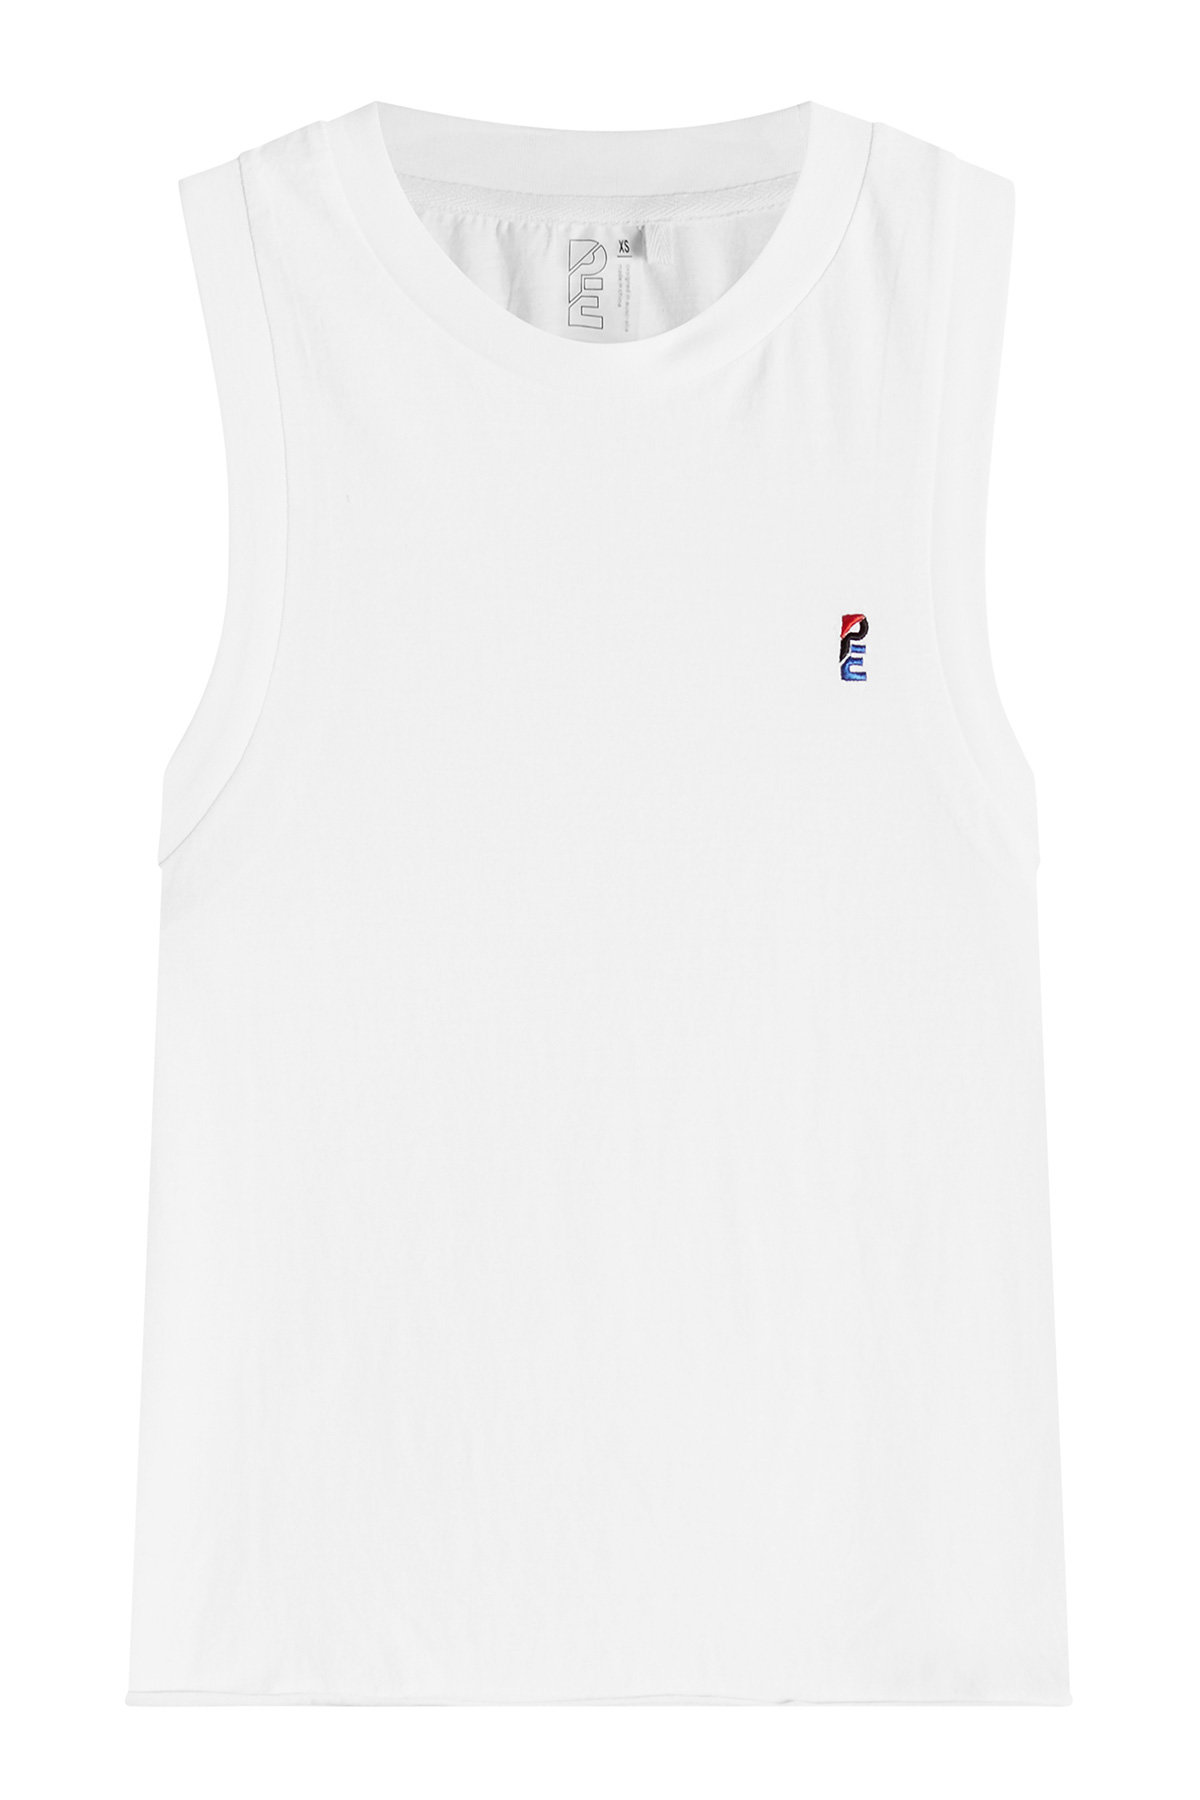 The Quantum Tank in Cotton by P.E. Nation